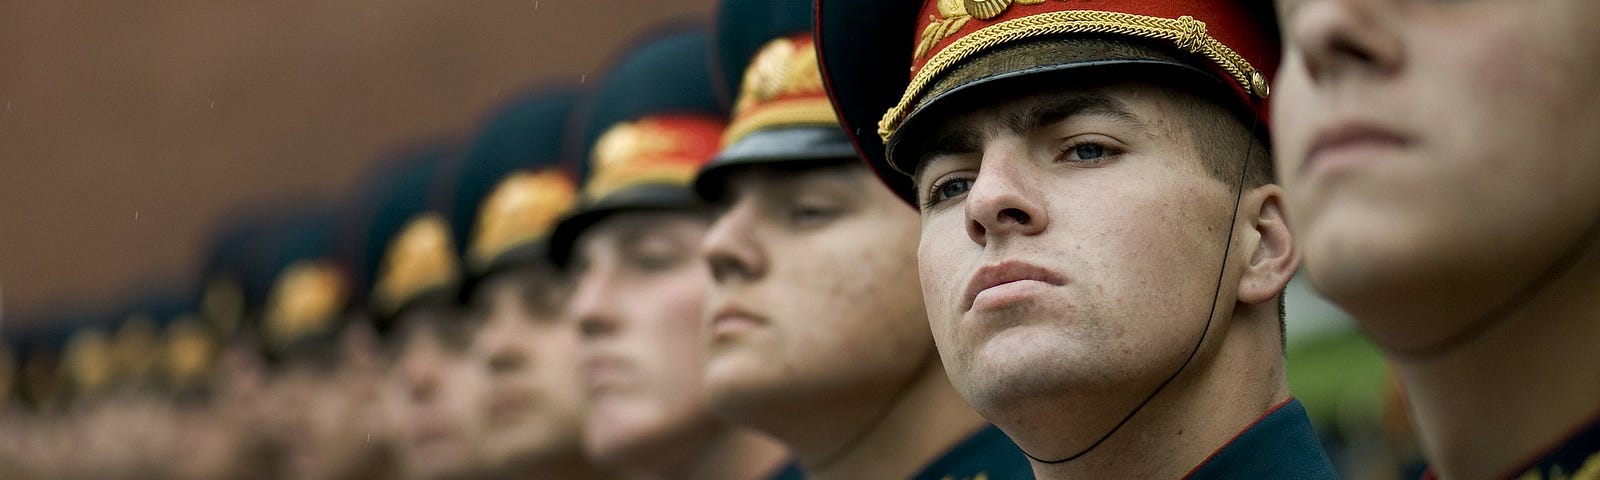 Russian soldiers standing in pensive mood